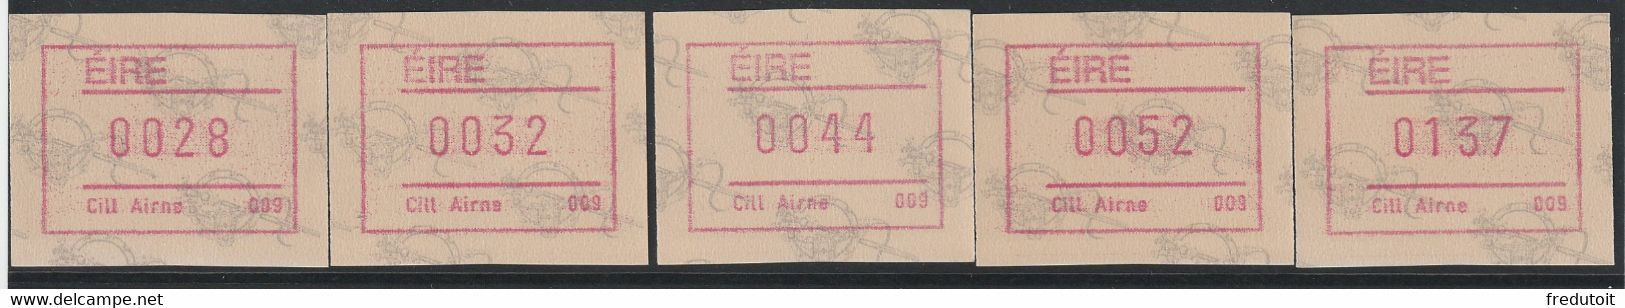 IRLANDE - Timbres Distributeurs / FRAMA  ATM - N°4** (1992) Cill Airne 009 - Franking Labels